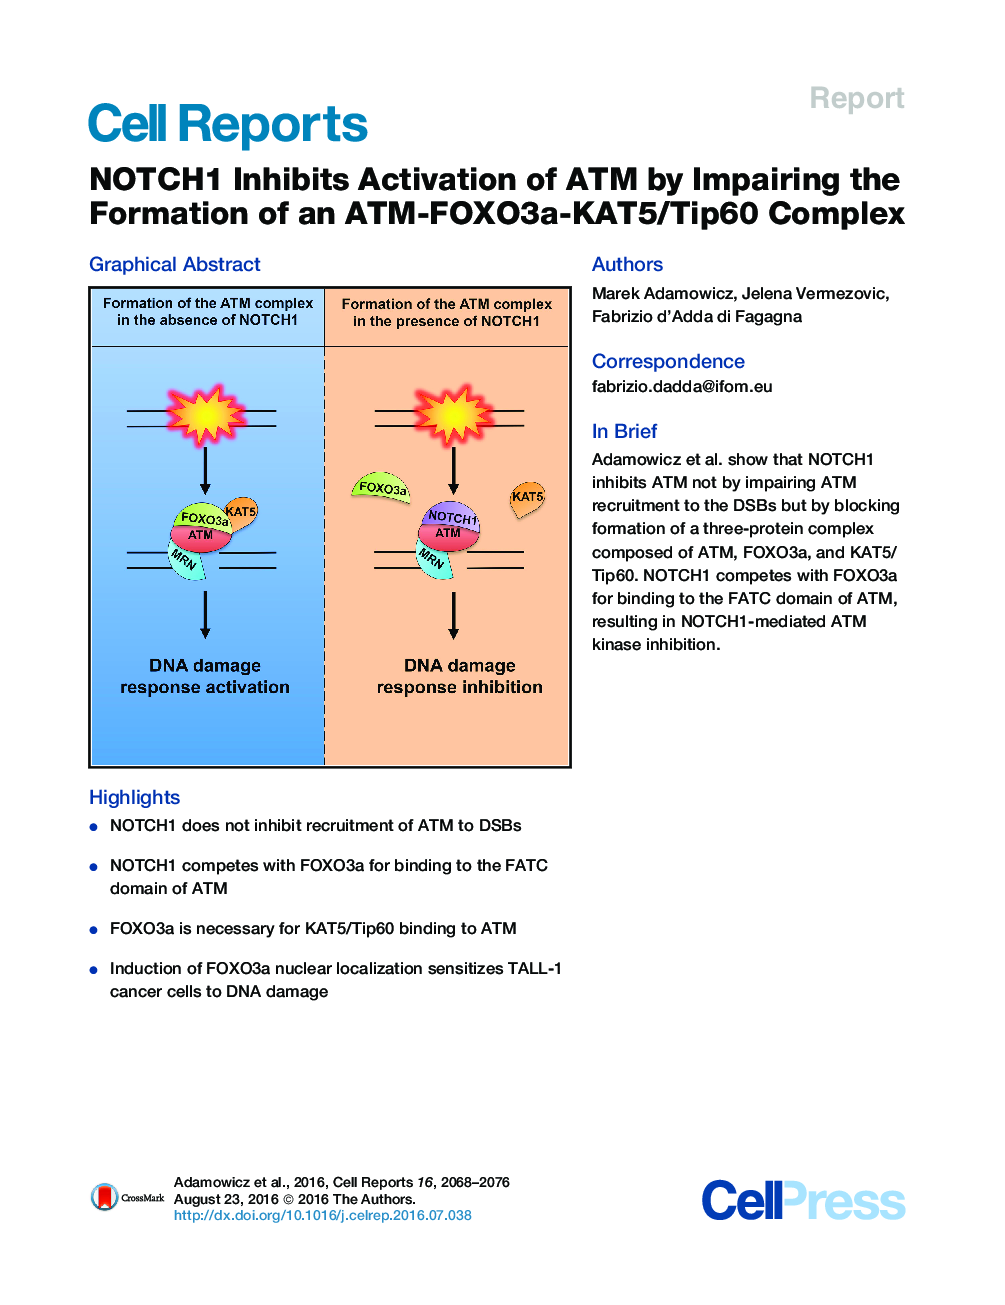 NOTCH1 Inhibits Activation of ATM by Impairing the Formation of an ATM-FOXO3a-KAT5/Tip60 Complex